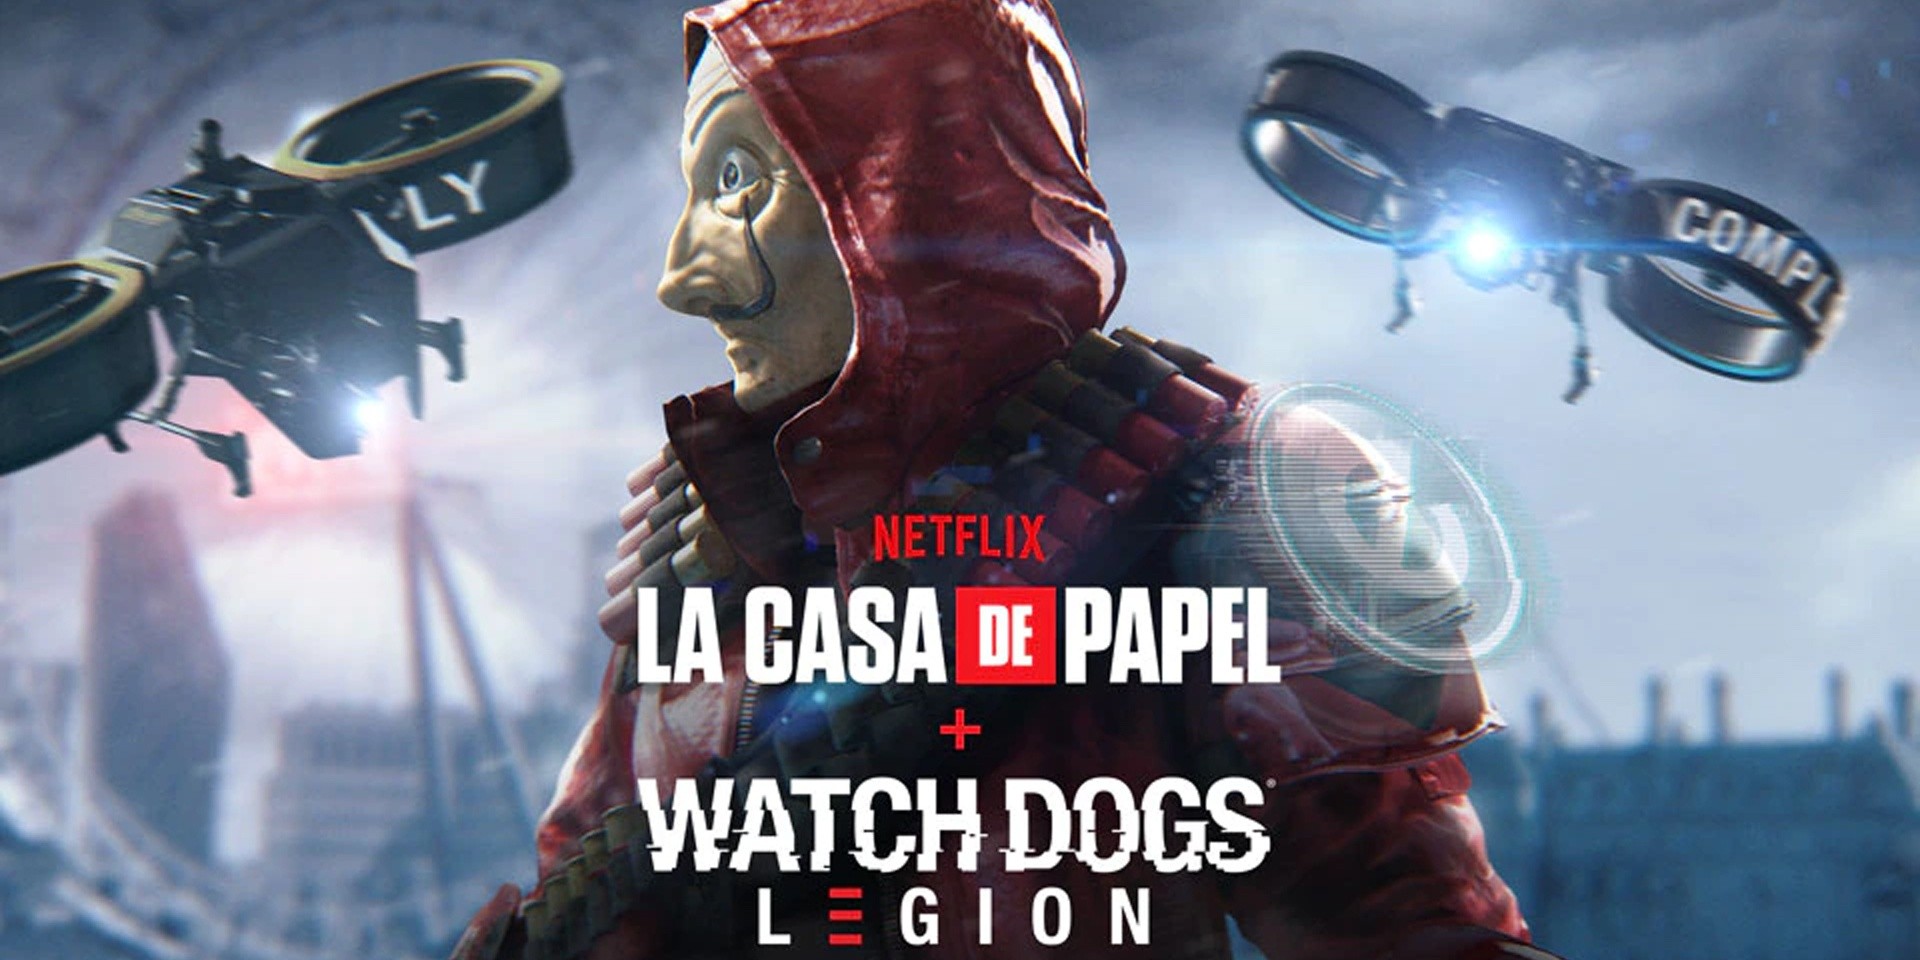 Watch Dogs: Legion available for free this weekend, launches new 'Money Heist' mission